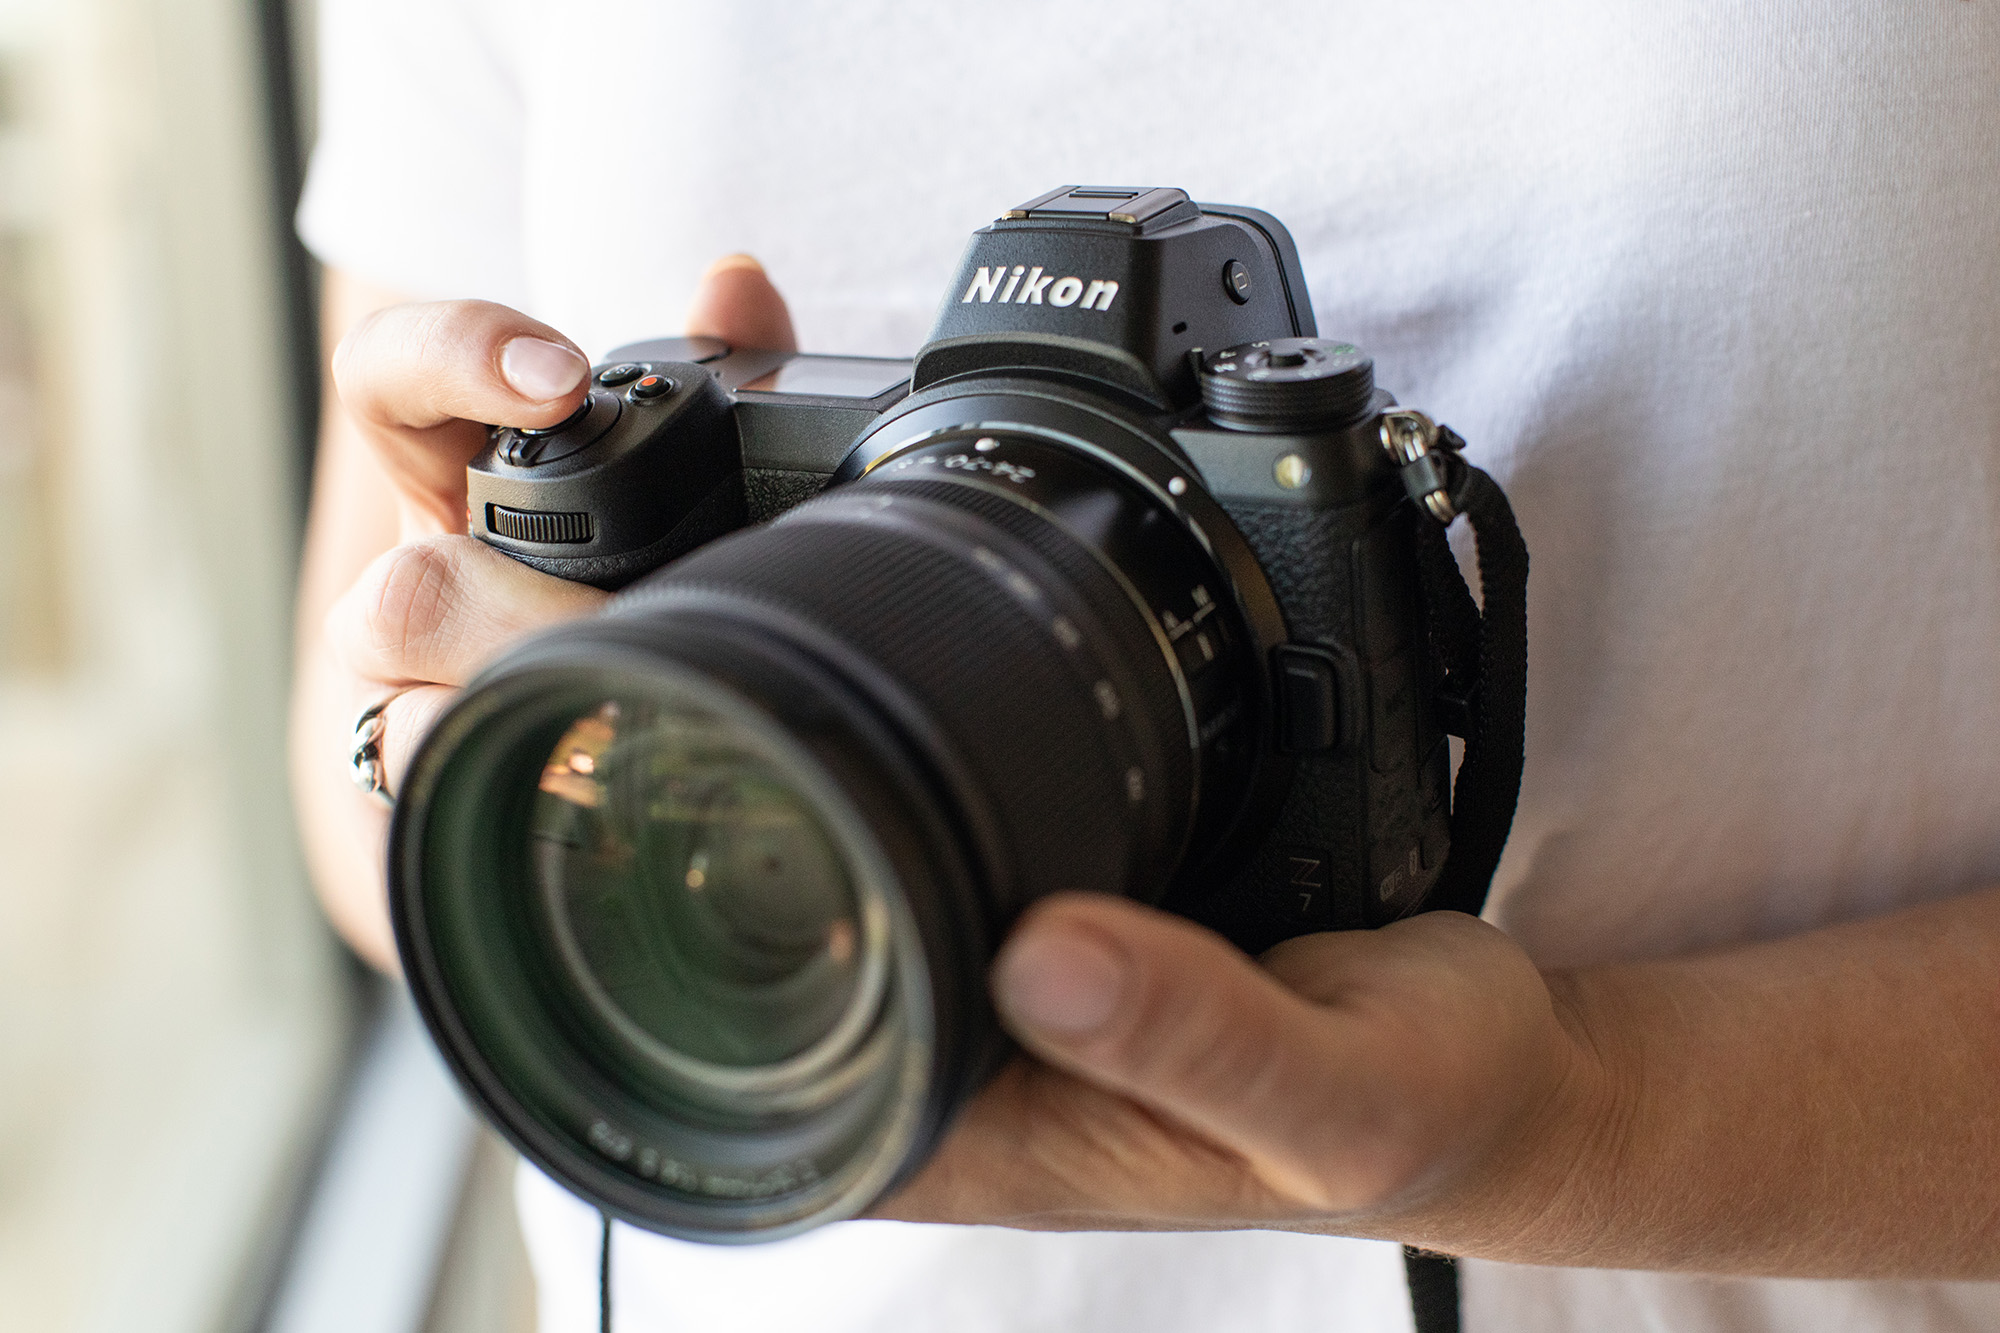 Nikon Z7 II: 8 reasons why it's convinced me to finally upgrade